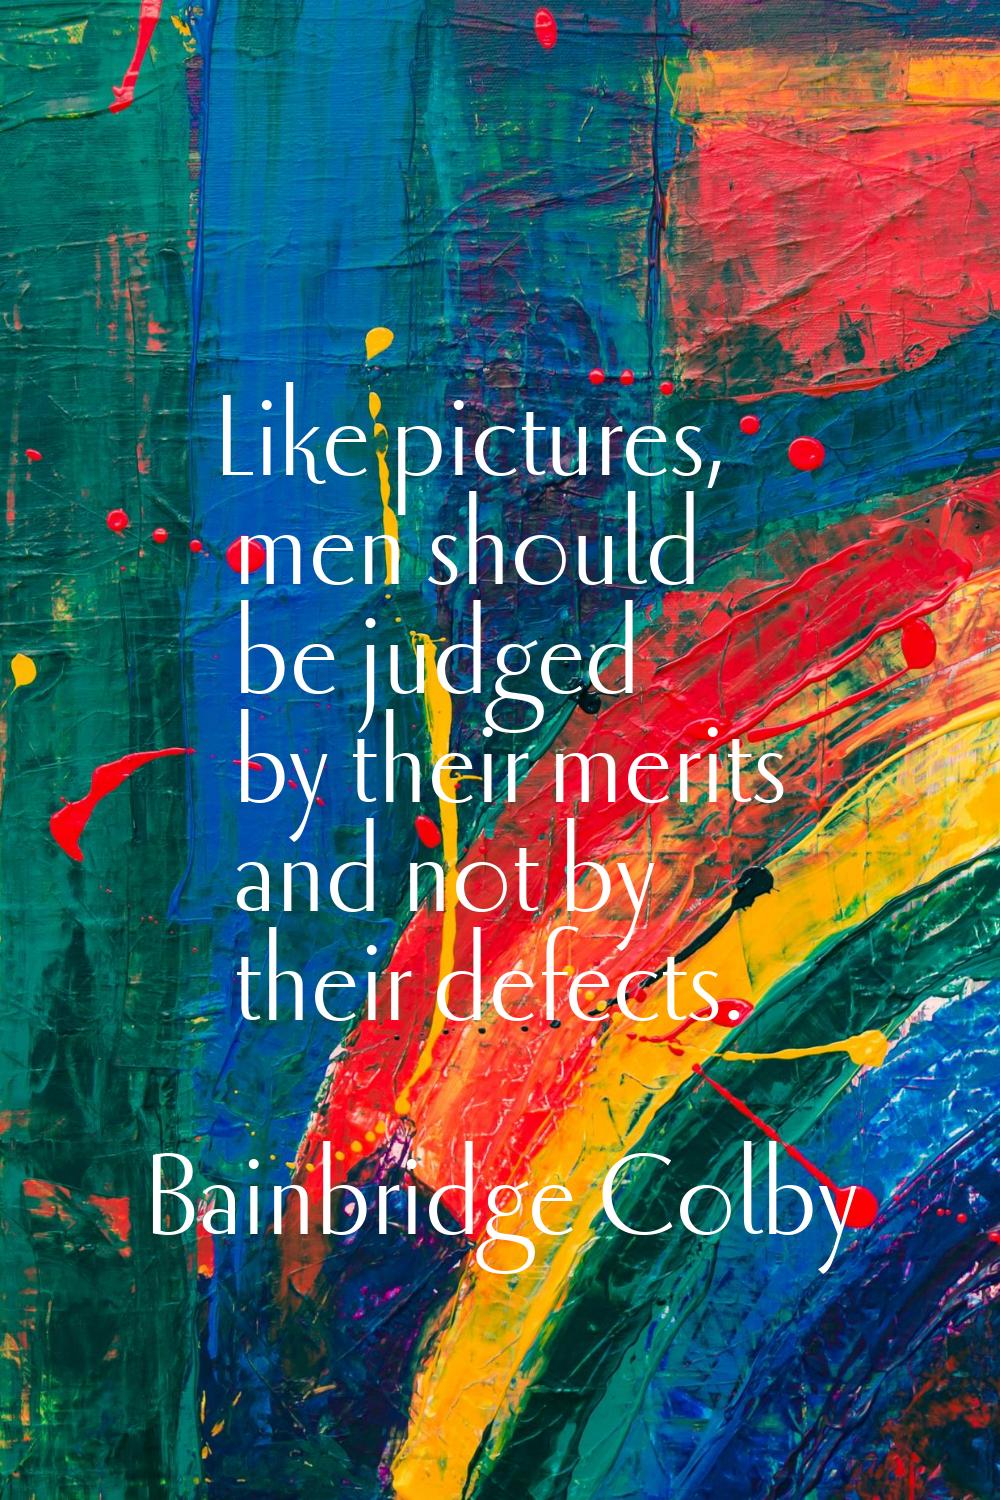 Like pictures, men should be judged by their merits and not by their defects.